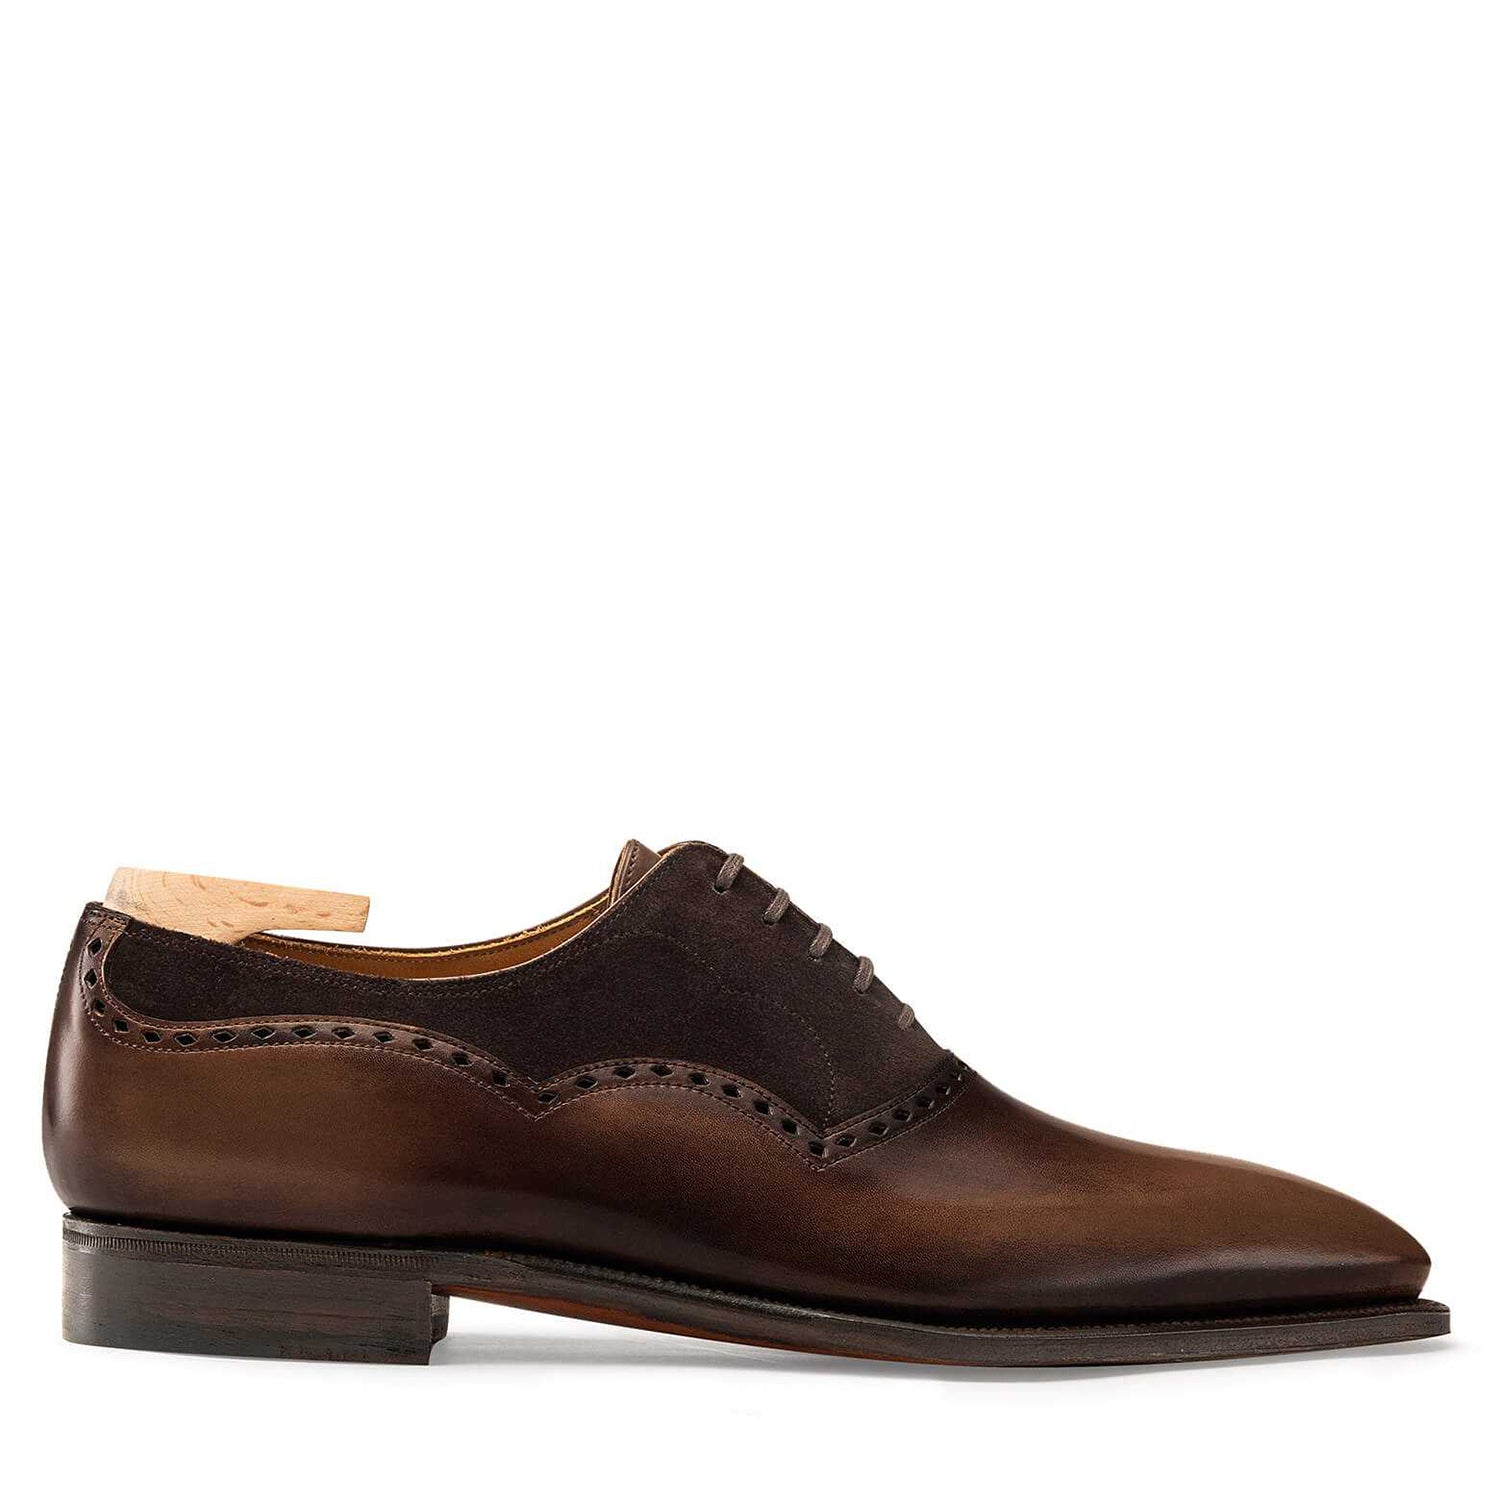 Wilfrid CALF AND SUEDE CALF LEATHER EBONY